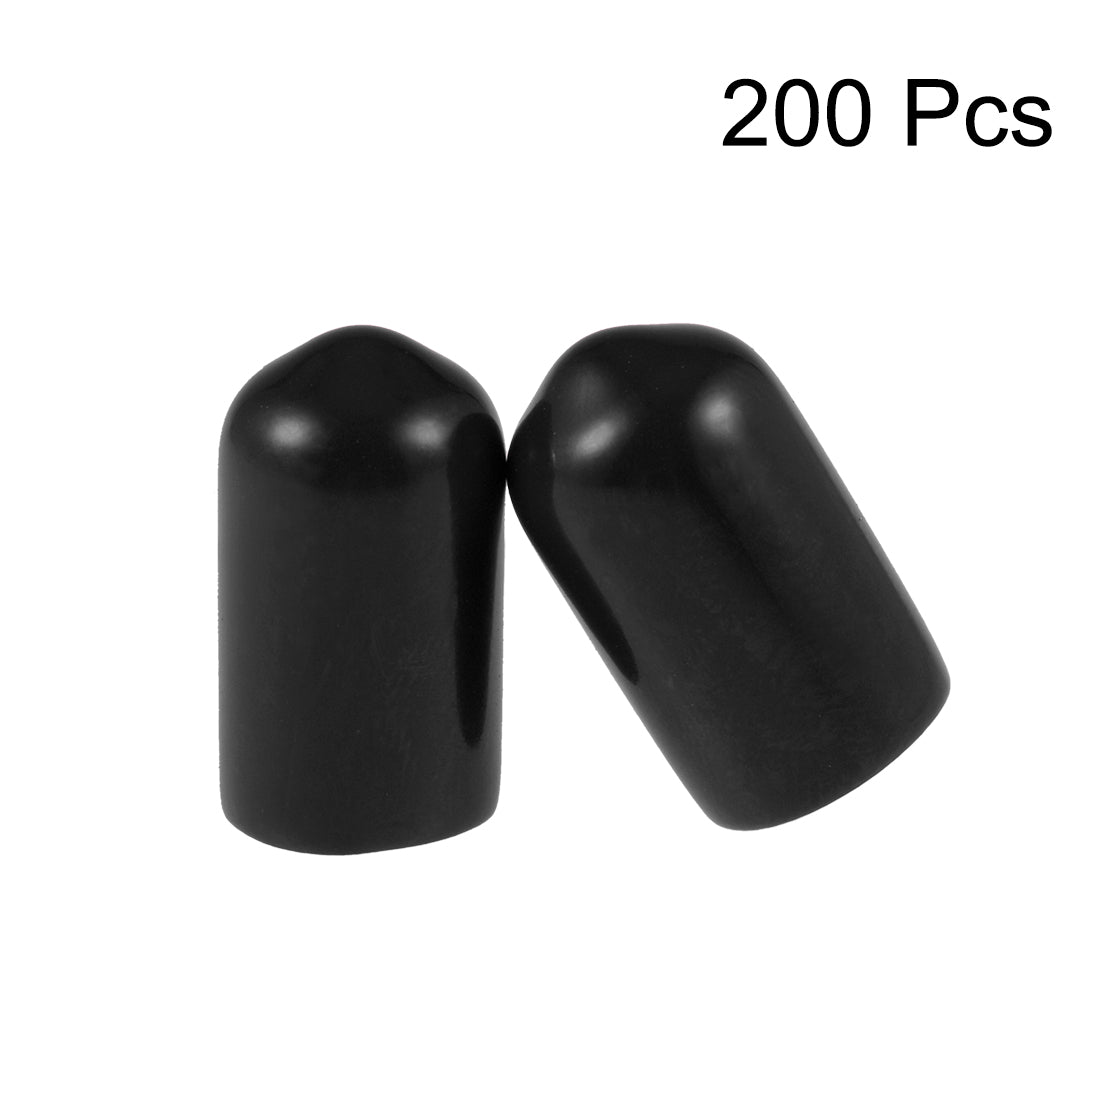 uxcell Uxcell 200pcs Rubber End Caps 7mm ID 15mm Height Screw Thread Protectors Black